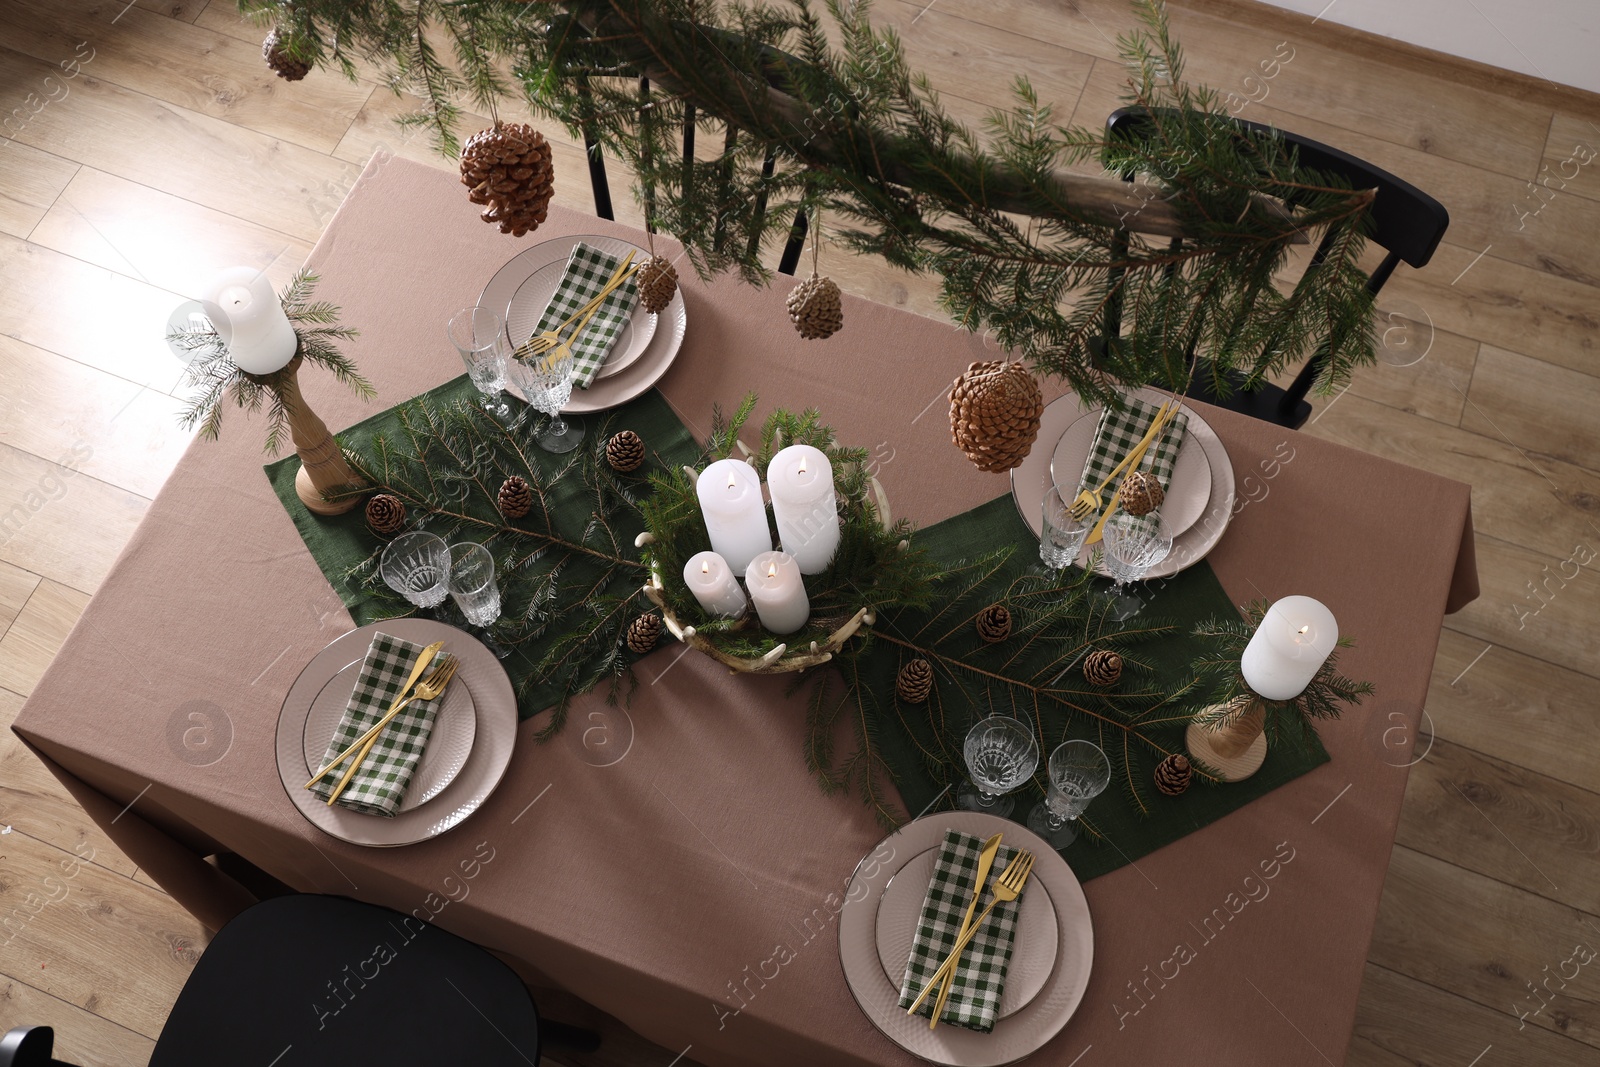 Photo of Christmas table setting with burning candles and other festive decor, above view